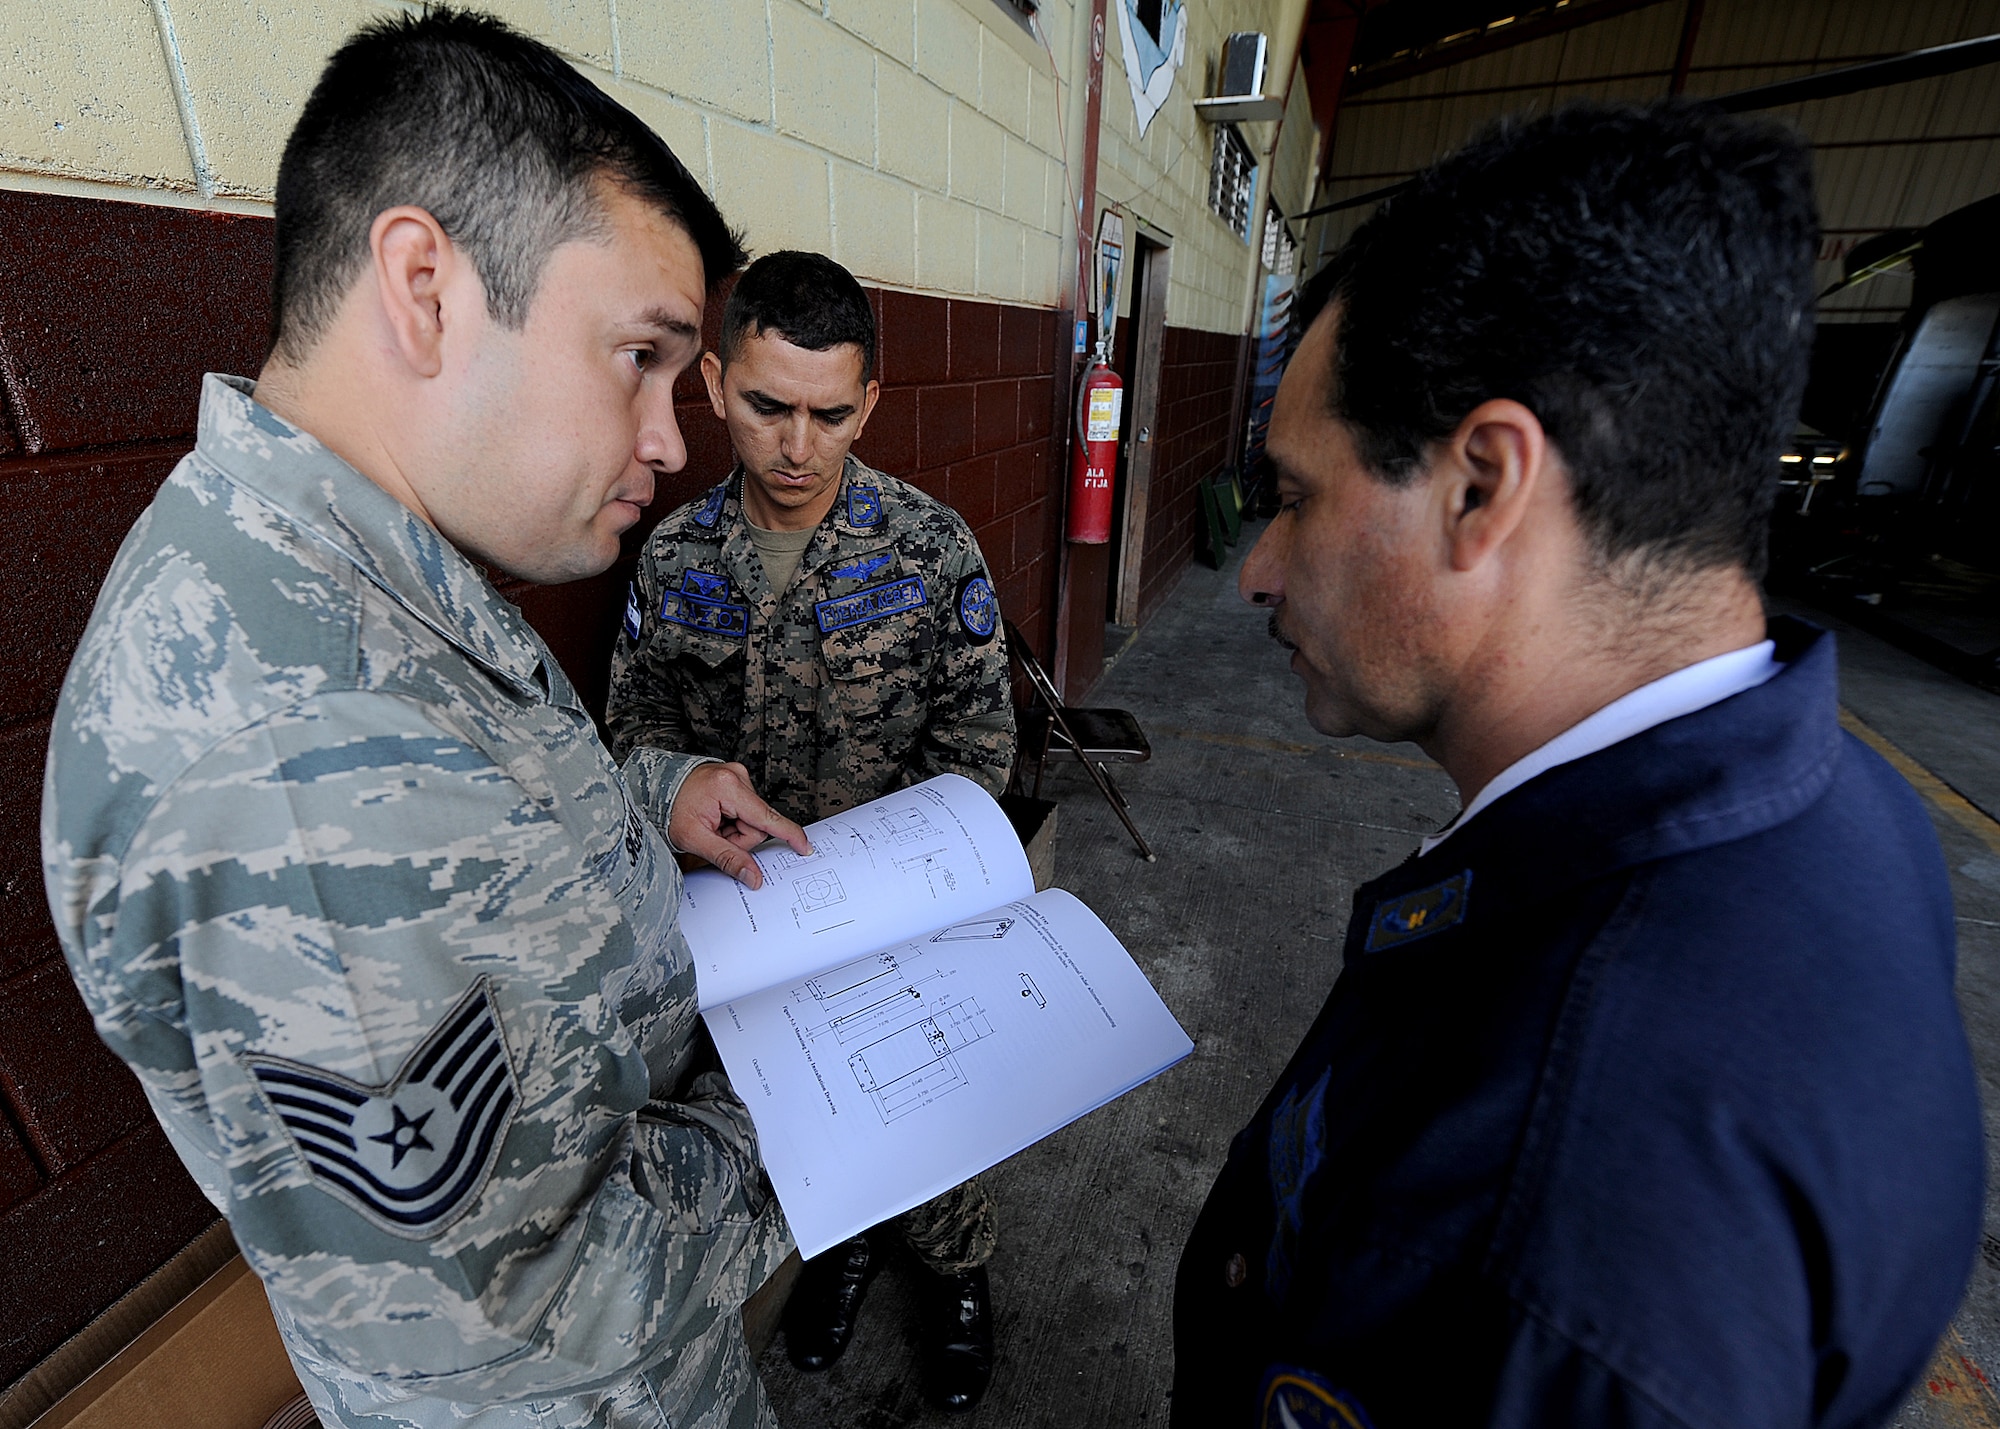 Technical Sgt. Ruben Sigala, Inter-American Air Forces Academy instructor, is showing members of the Honduran Air Force the dimension of the signal transmitter for the FAH helicopter, in Tegucigalpa, Honduras, Feb. 3.  (U.S. Air Force photo by Tech. Sgt. Lesley Waters)